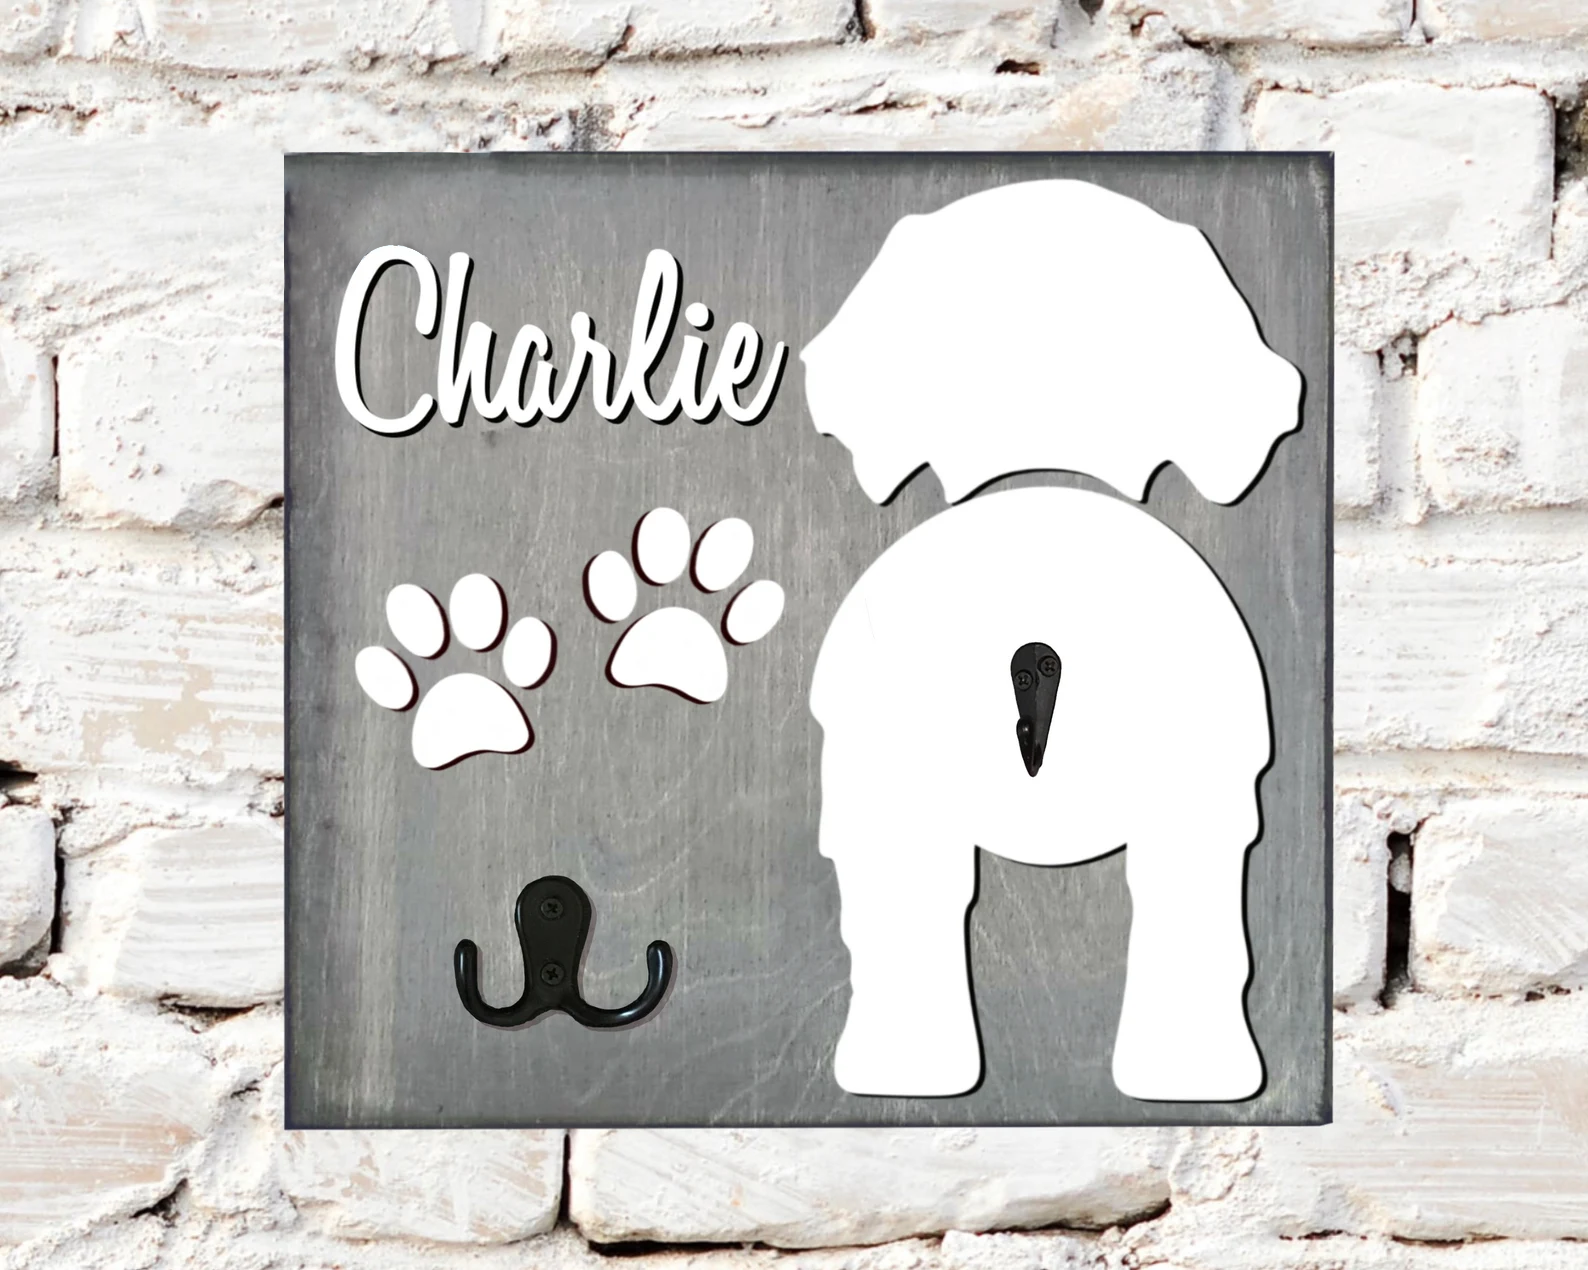 1 dog-Personalized dog key hanger, gifts for dog lovers, housewarming pet gifts, dog gifts.